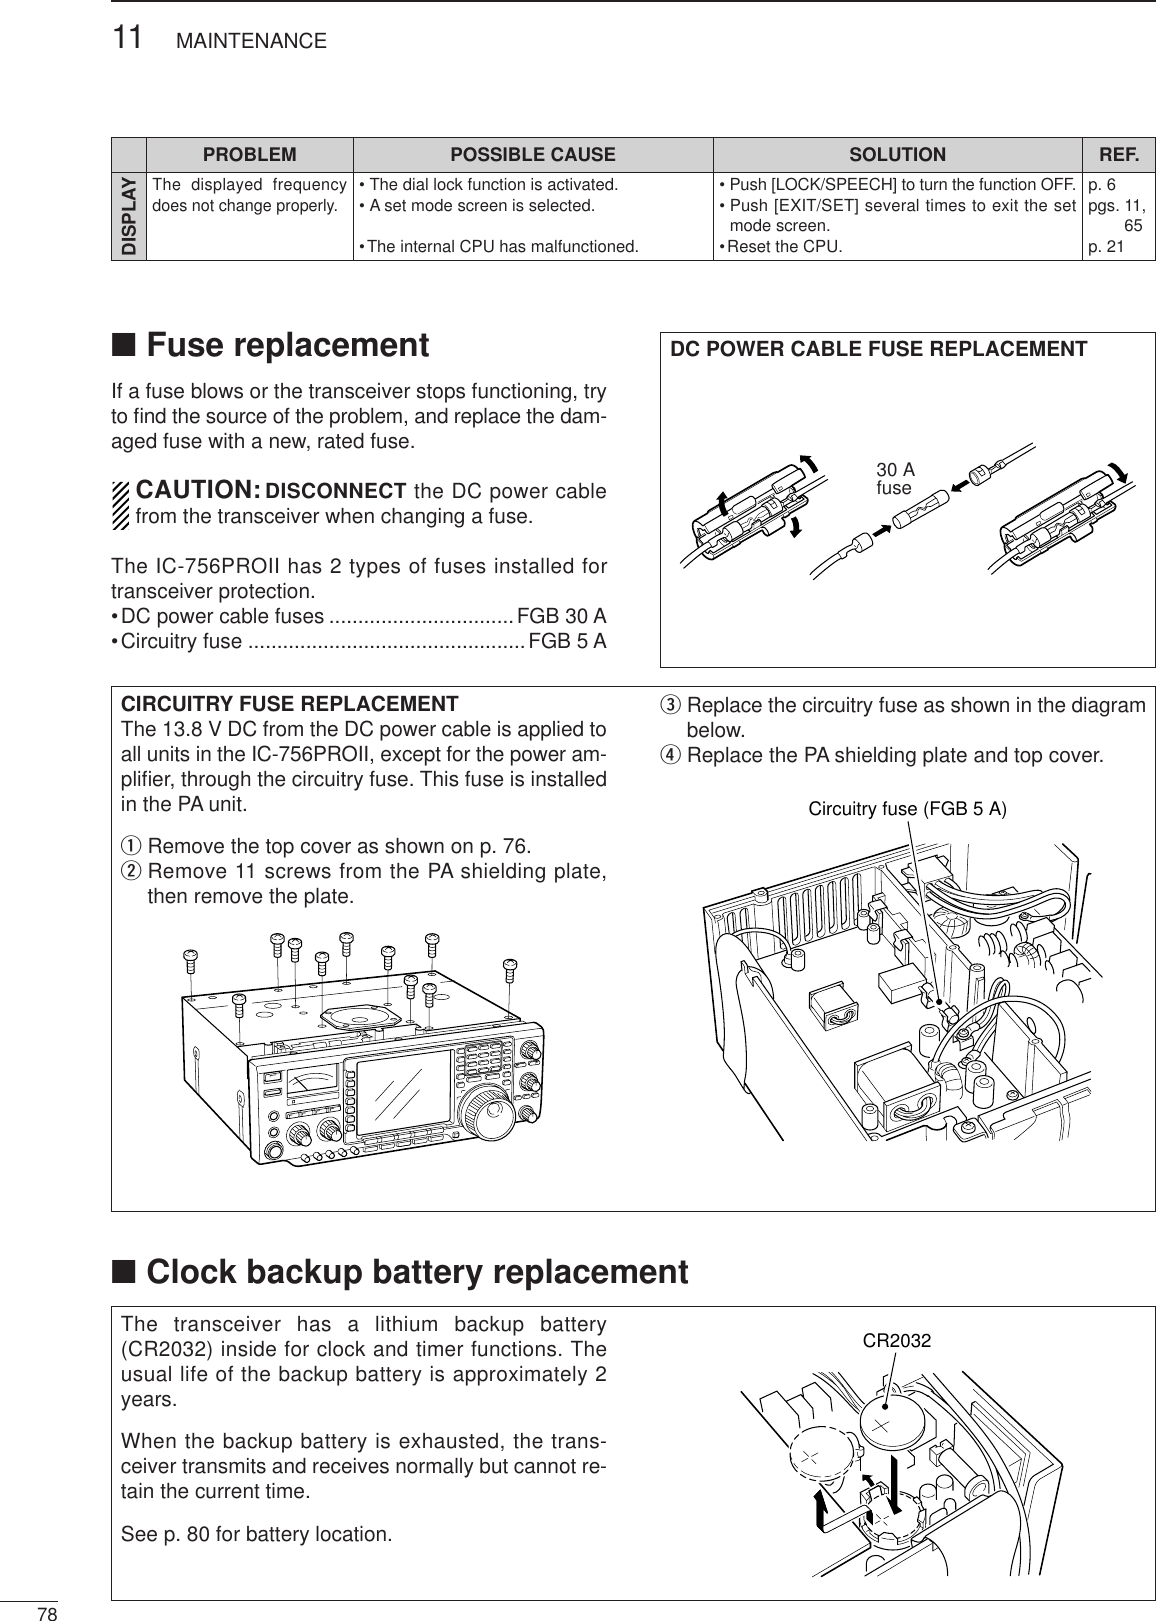 7811 MAINTENANCE■Fuse replacementIf a fuse blows or the transceiver stops functioning, tryto ﬁnd the source of the problem, and replace the dam-aged fuse with a new, rated fuse.CAUTION:DISCONNECT the DC power cablefrom the transceiver when changing a fuse.The IC-756PROII has 2 types of fuses installed fortransceiver protection.•DC power cable fuses ................................FGB 30 A•Circuitry fuse ................................................FGB 5 ADC POWER CABLE FUSE REPLACEMENT30 A fuse■Clock backup battery replacementThe transceiver has a lithium backup battery(CR2032) inside for clock and timer functions. Theusual life of the backup battery is approximately 2years.When the backup battery is exhausted, the trans-ceiver transmits and receives normally but cannot re-tain the current time.See p. 80 for battery location.CR2032CIRCUITRY FUSE REPLACEMENTThe 13.8 V DC from the DC power cable is applied toall units in the IC-756PROII, except for the power am-pliﬁer, through the circuitry fuse. This fuse is installedin the PA unit.qRemove the top cover as shown on p. 76.wRemove 11 screws from the PA shielding plate,then remove the plate.eReplace the circuitry fuse as shown in the diagrambelow.rReplace the PA shielding plate and top cover.Circuitry fuse (FGB 5 A)PROBLEM POSSIBLE CAUSE SOLUTION REF.DISPLAYThe displayed frequencydoes not change properly.• The dial lock function is activated.• A set mode screen is selected.•The internal CPU has malfunctioned.• Push [LOCK/SPEECH] to turn the function OFF.• Push [EXIT/SET] several times to exit the setmode screen.•Reset the CPU.p. 6pgs. 11,65p. 21